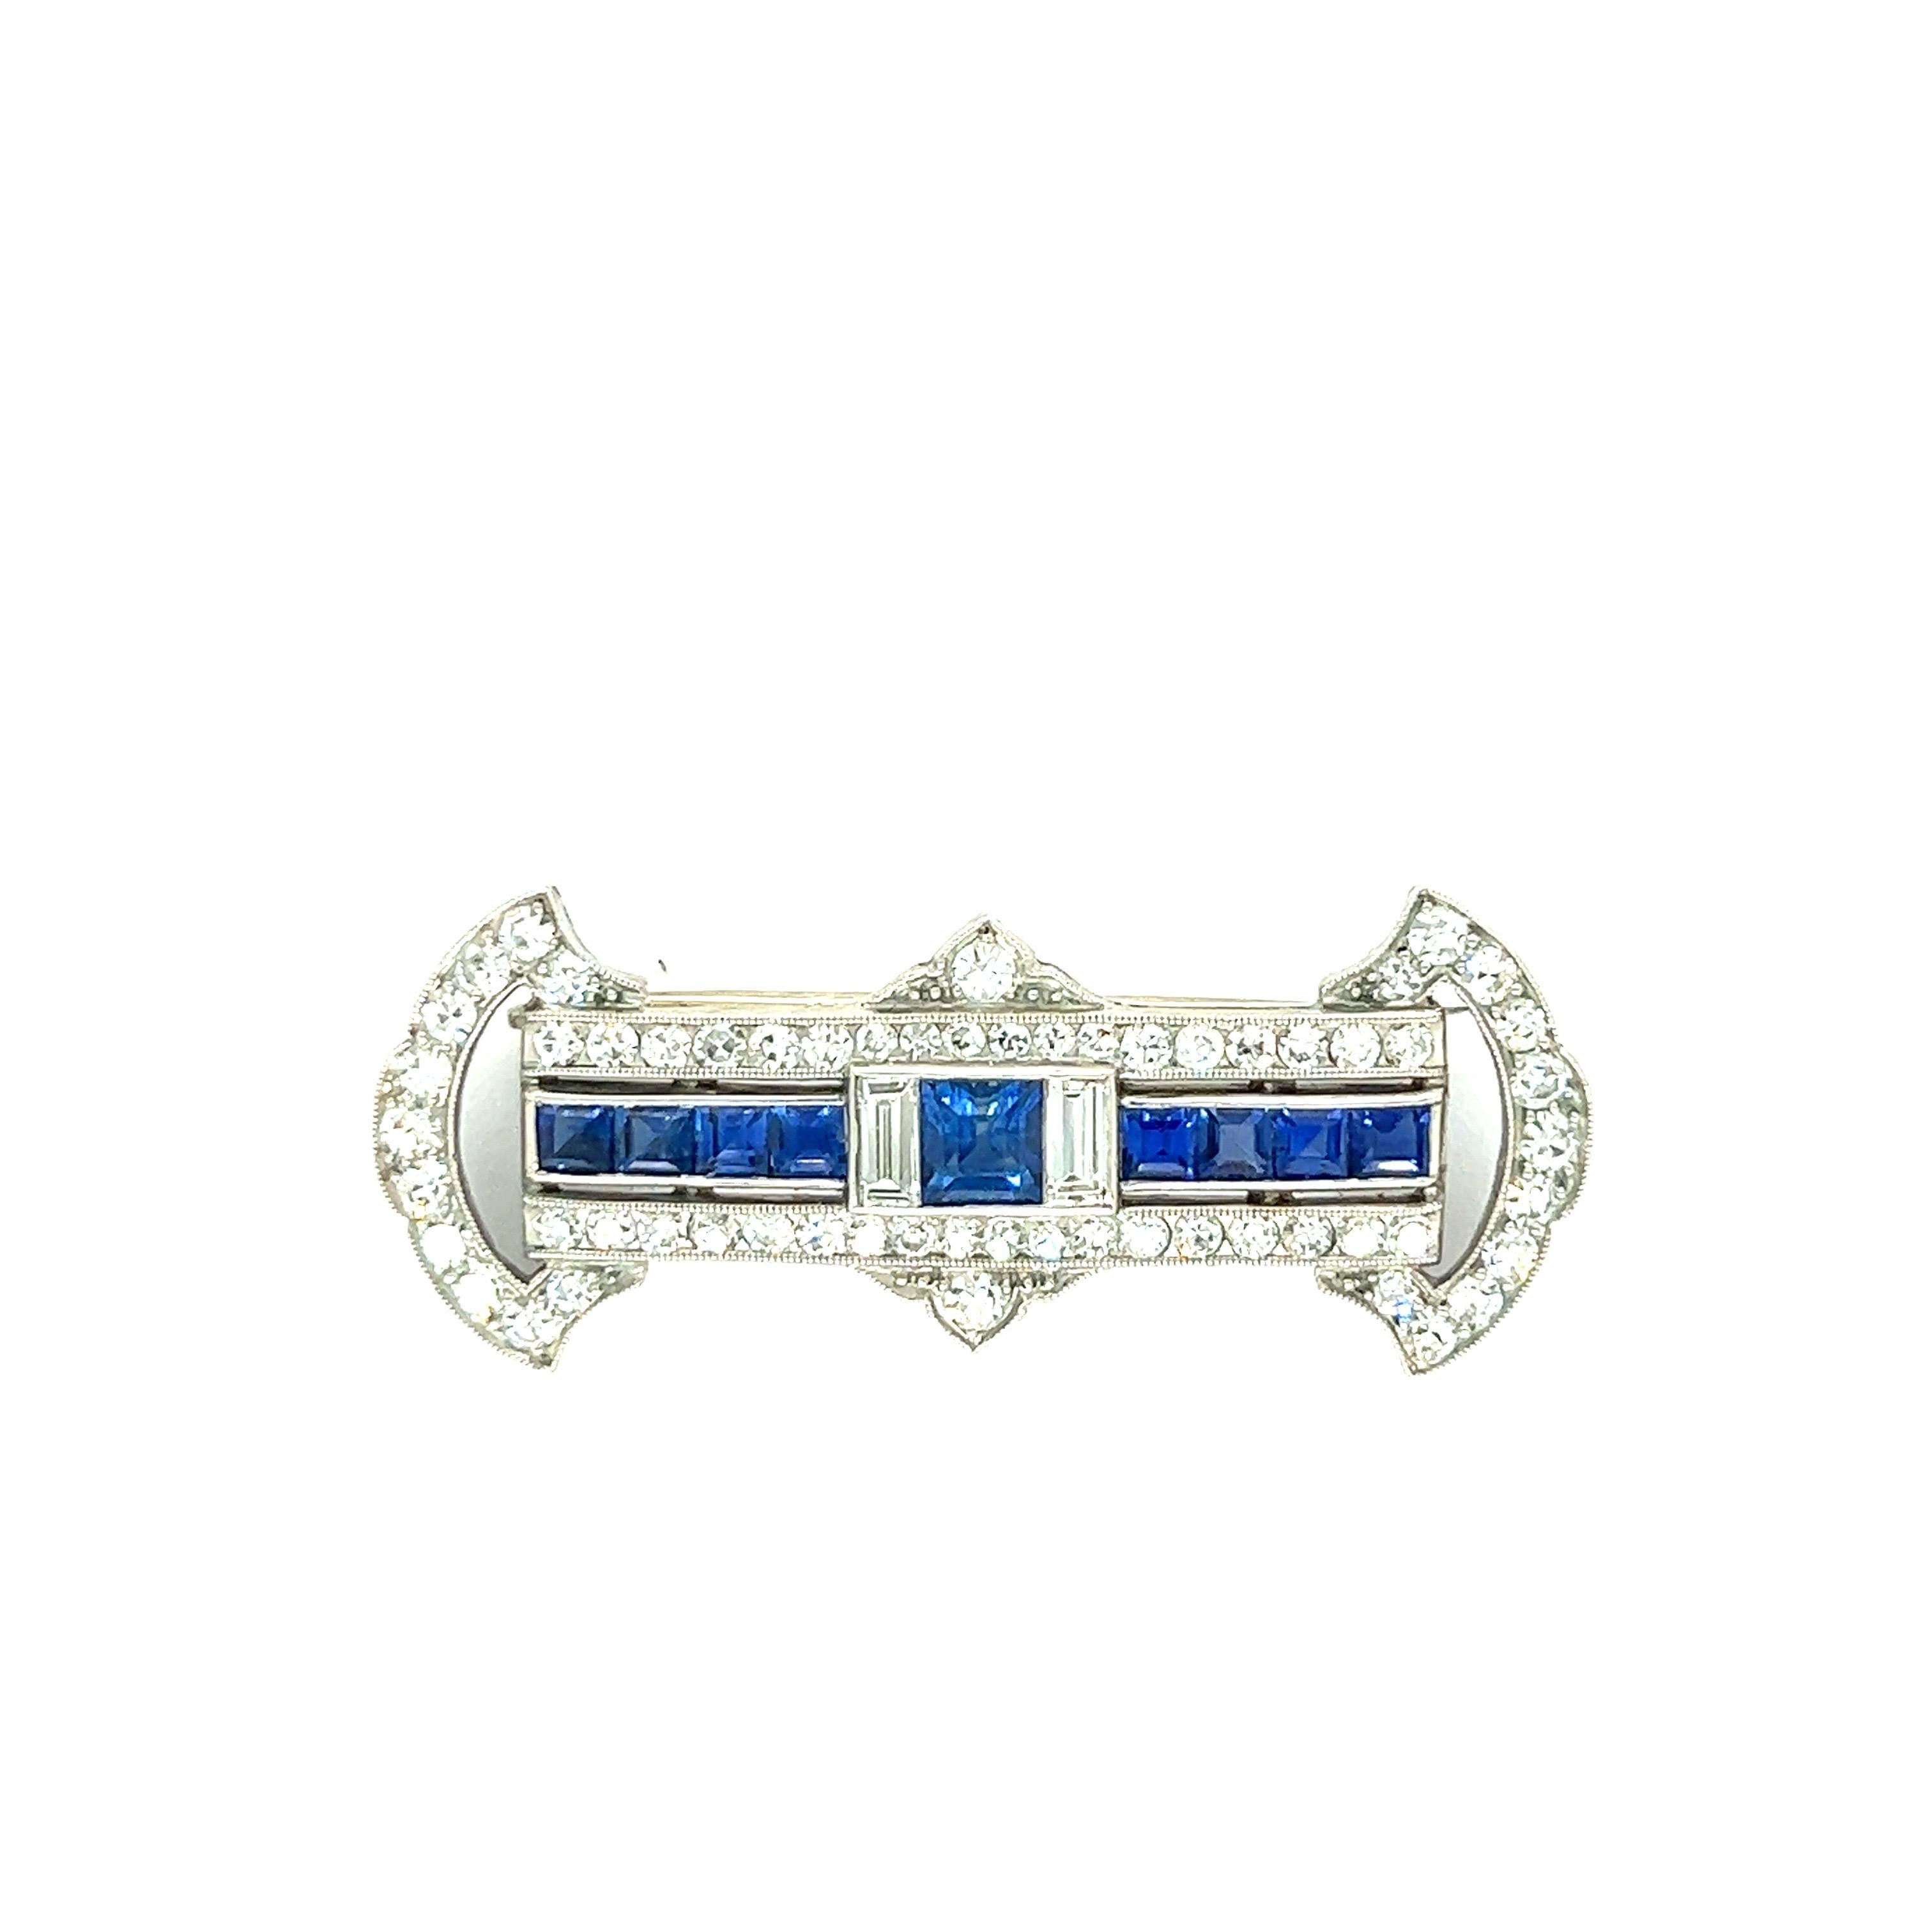 Art Deco Sapphire Diamond Platinum Pin Brooch

Square-shaped sapphires, with baguette-cut diamonds and a single-cut diamond border of approximately 1 carat total; set in platinum 

Size: width 3.5 cm, length 1.4 cm
Total weight: 6.4 grams
